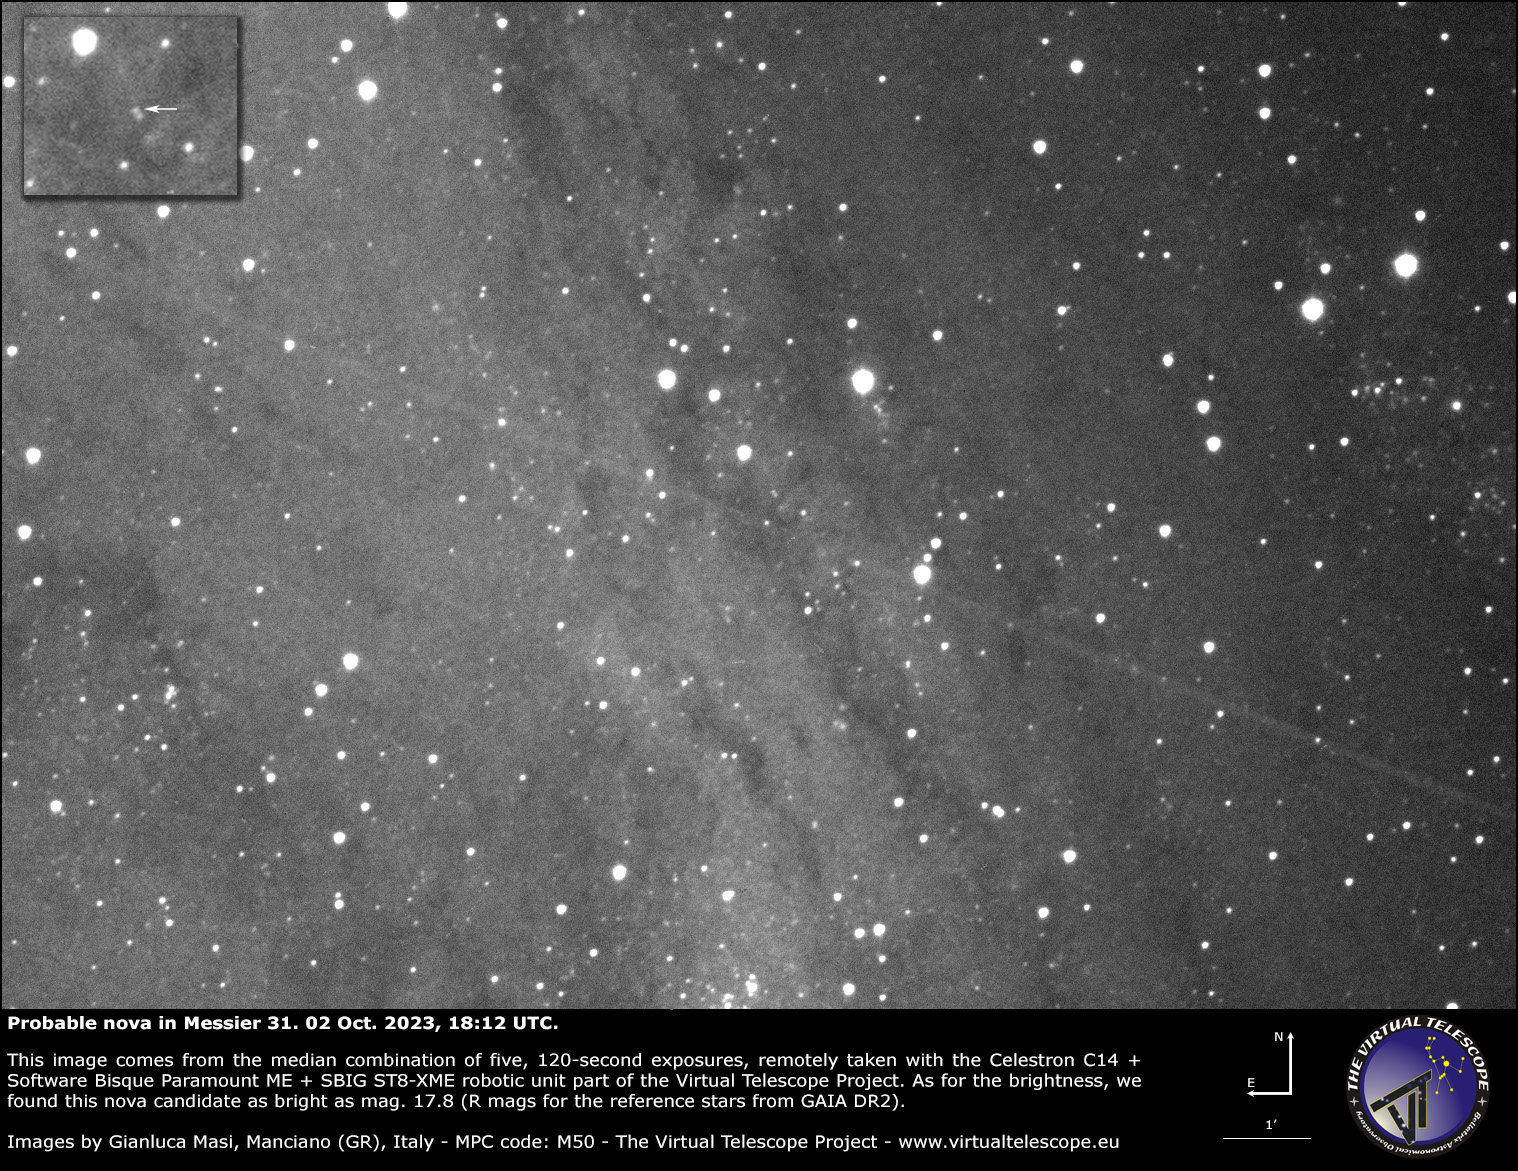 Probable nova in Messier 31 discovered by G. Masi on 1 Oct. 2023.